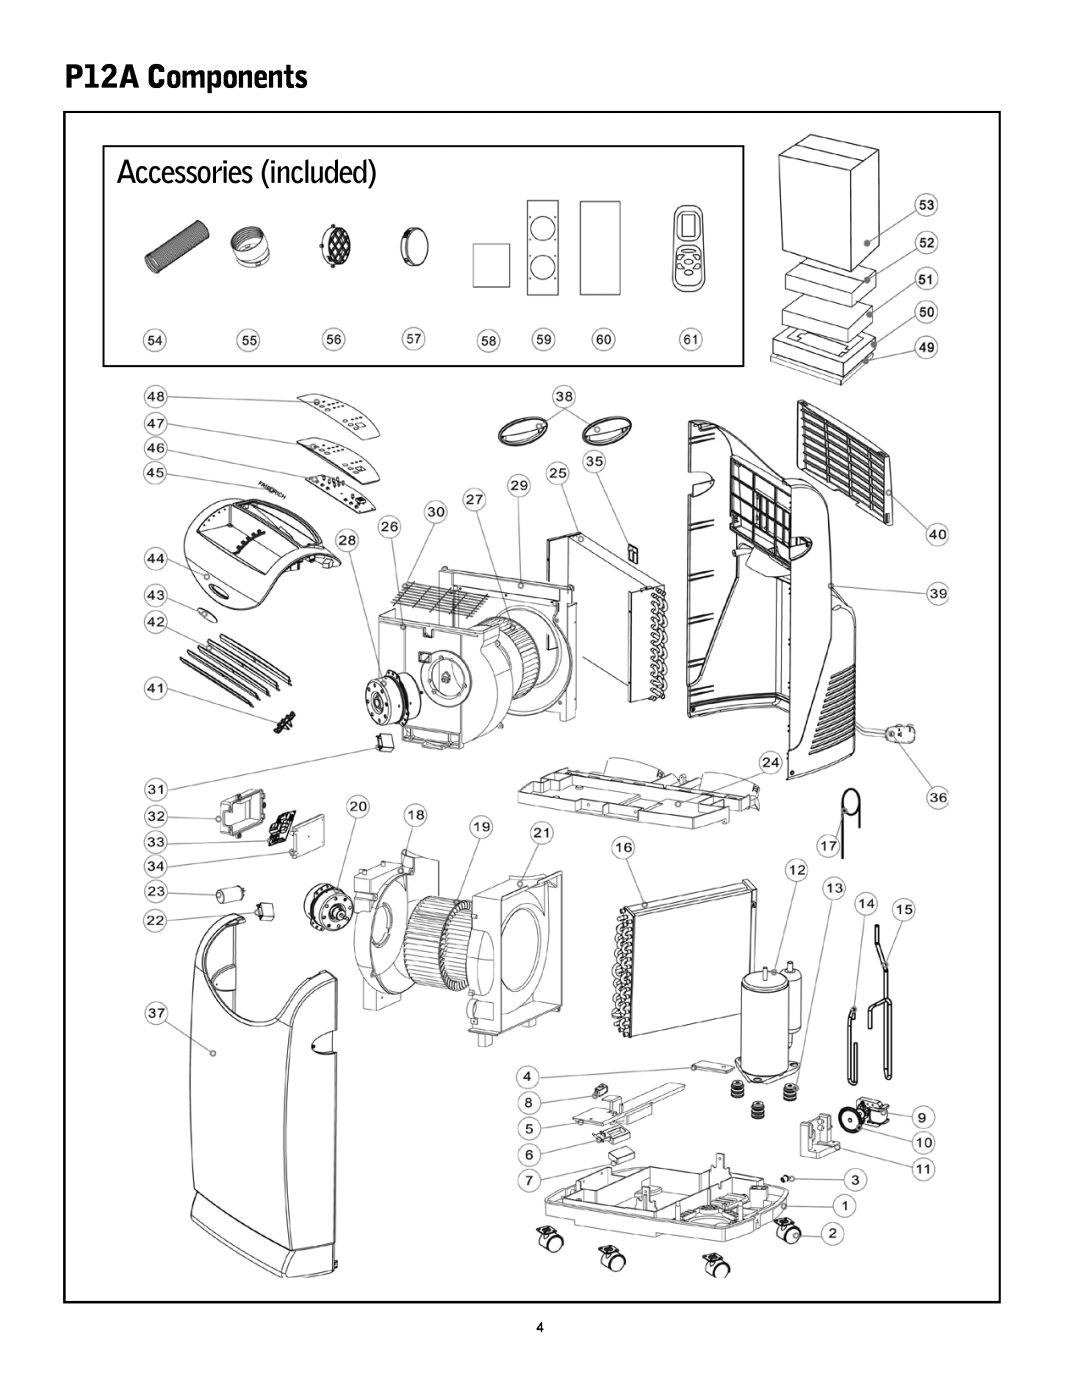 Friedrich manual P12A Components, Accessories included 